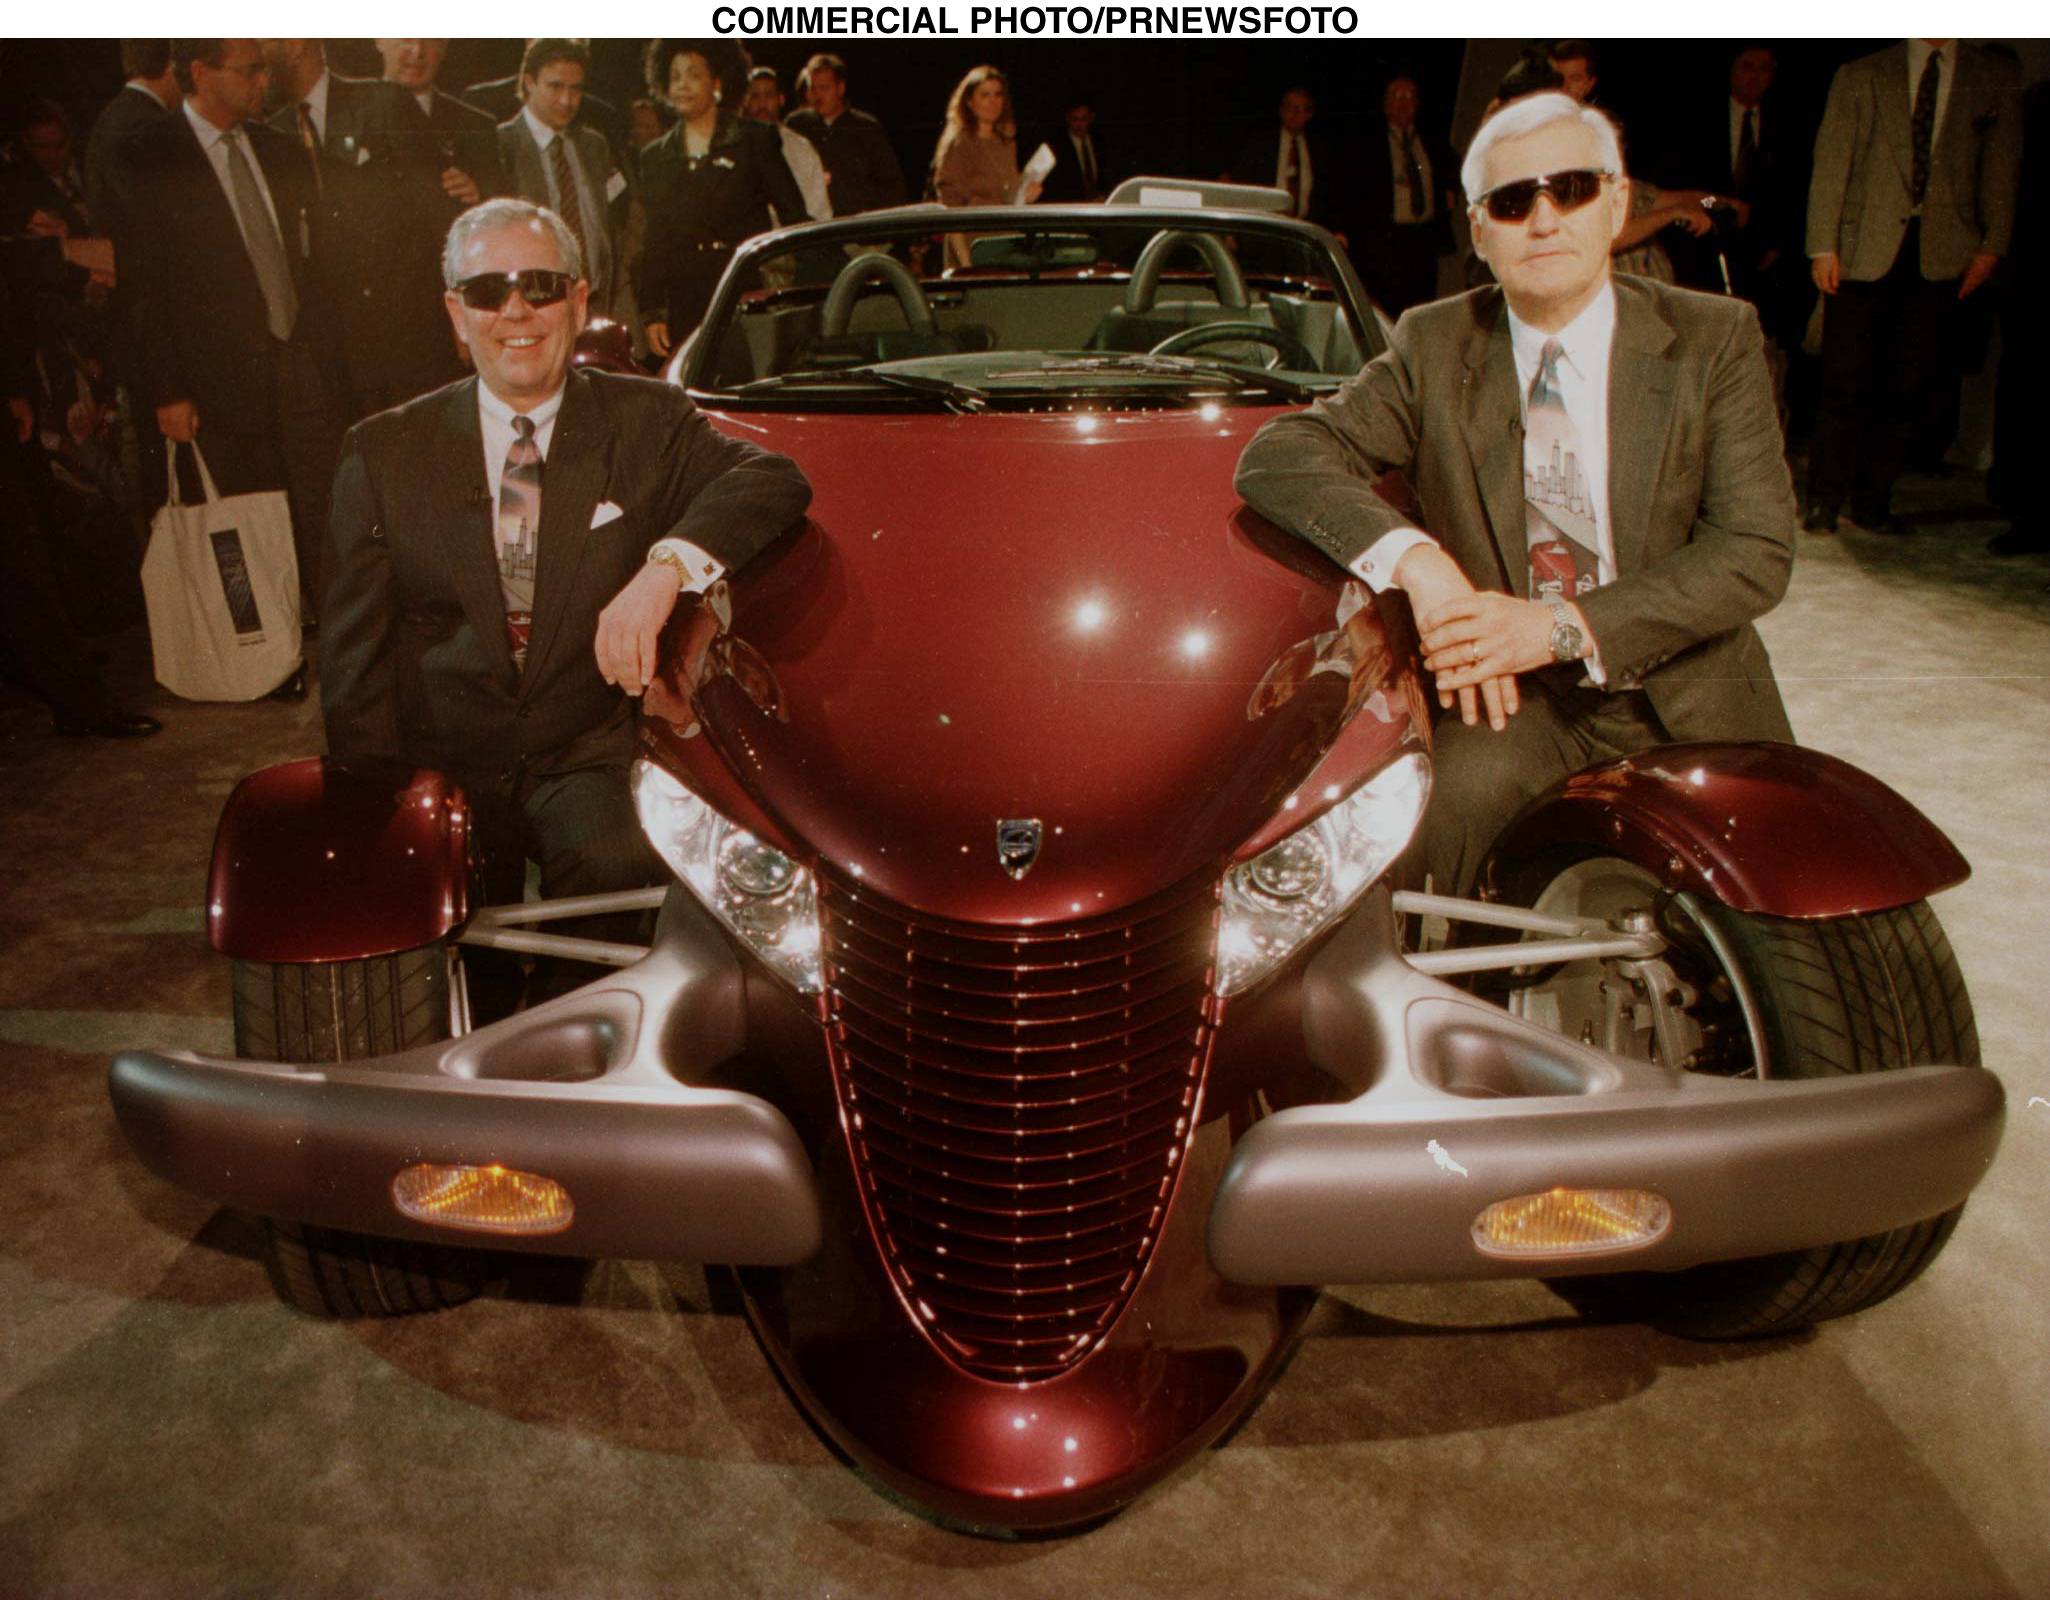 Chrysler Chairman Robert Eaton(L) and President Robert Lutz pose with the Prowler, in their sunglasses, after its introduction at the North American International Auto Show1/3.